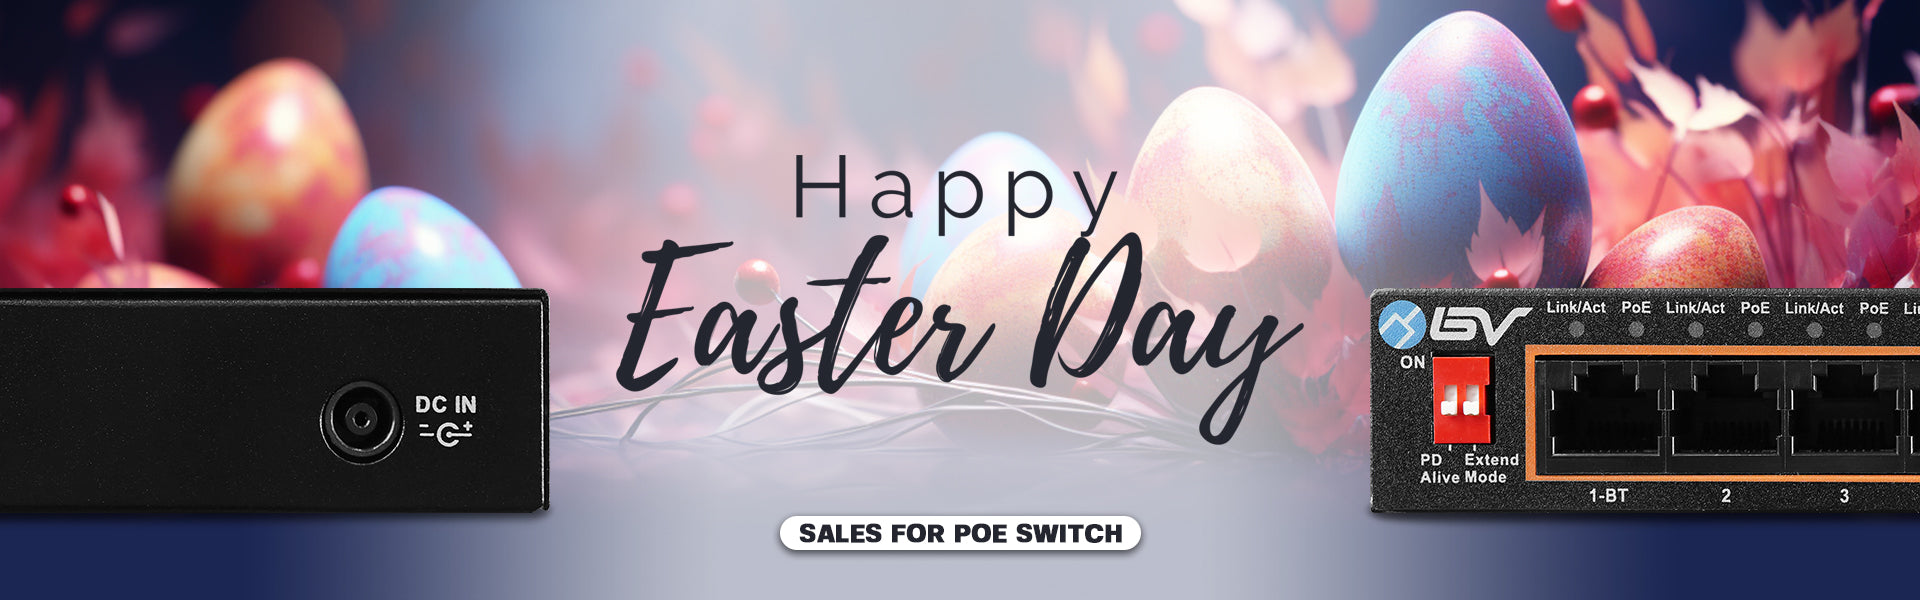 BV Security - Easter PoE Switch Sale